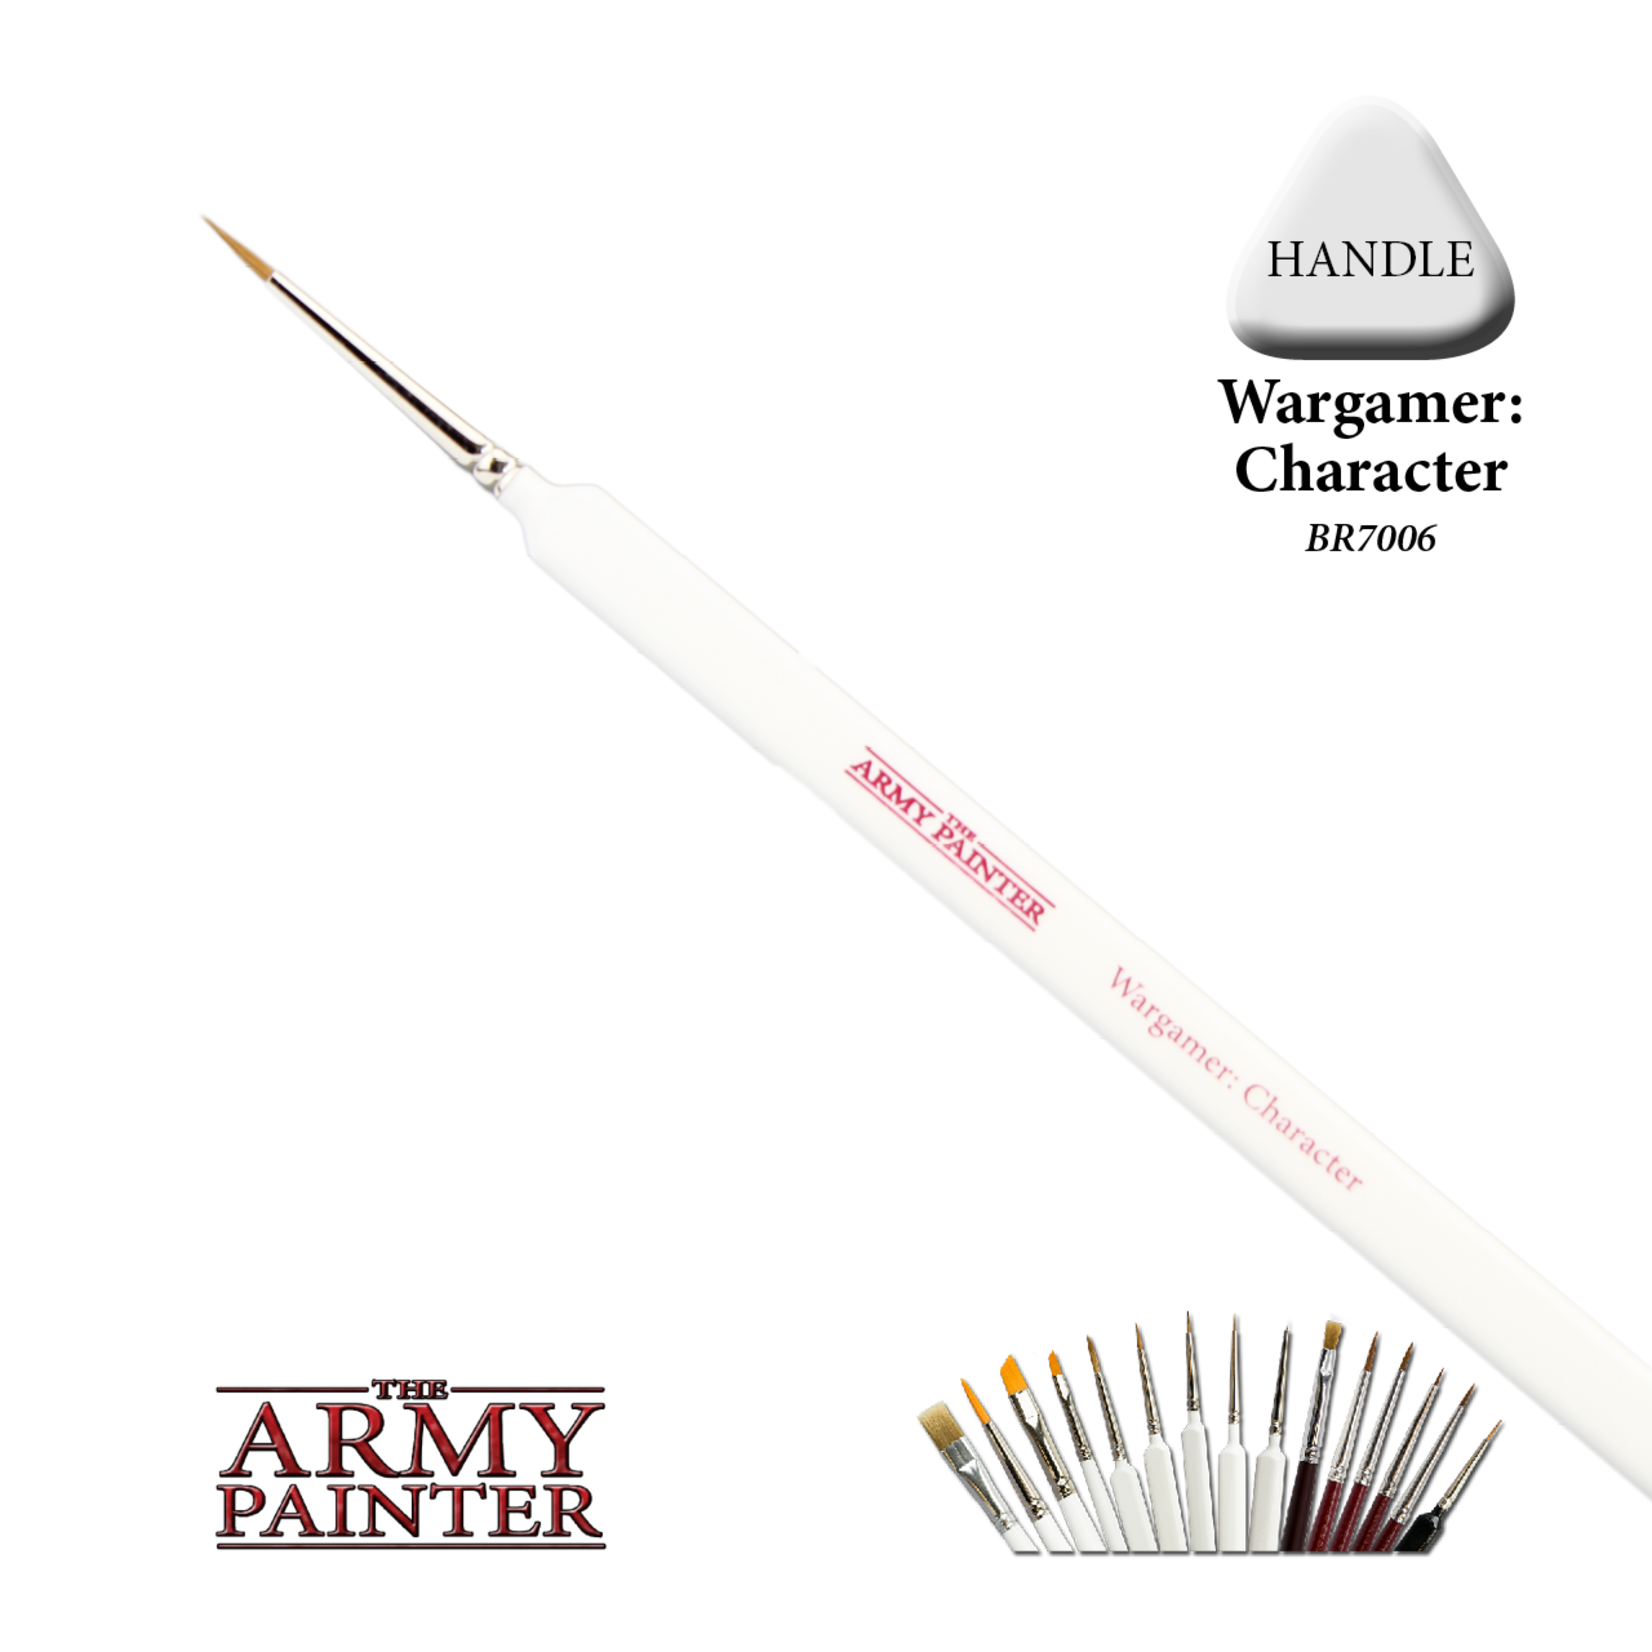 The Army Painter Character Brush